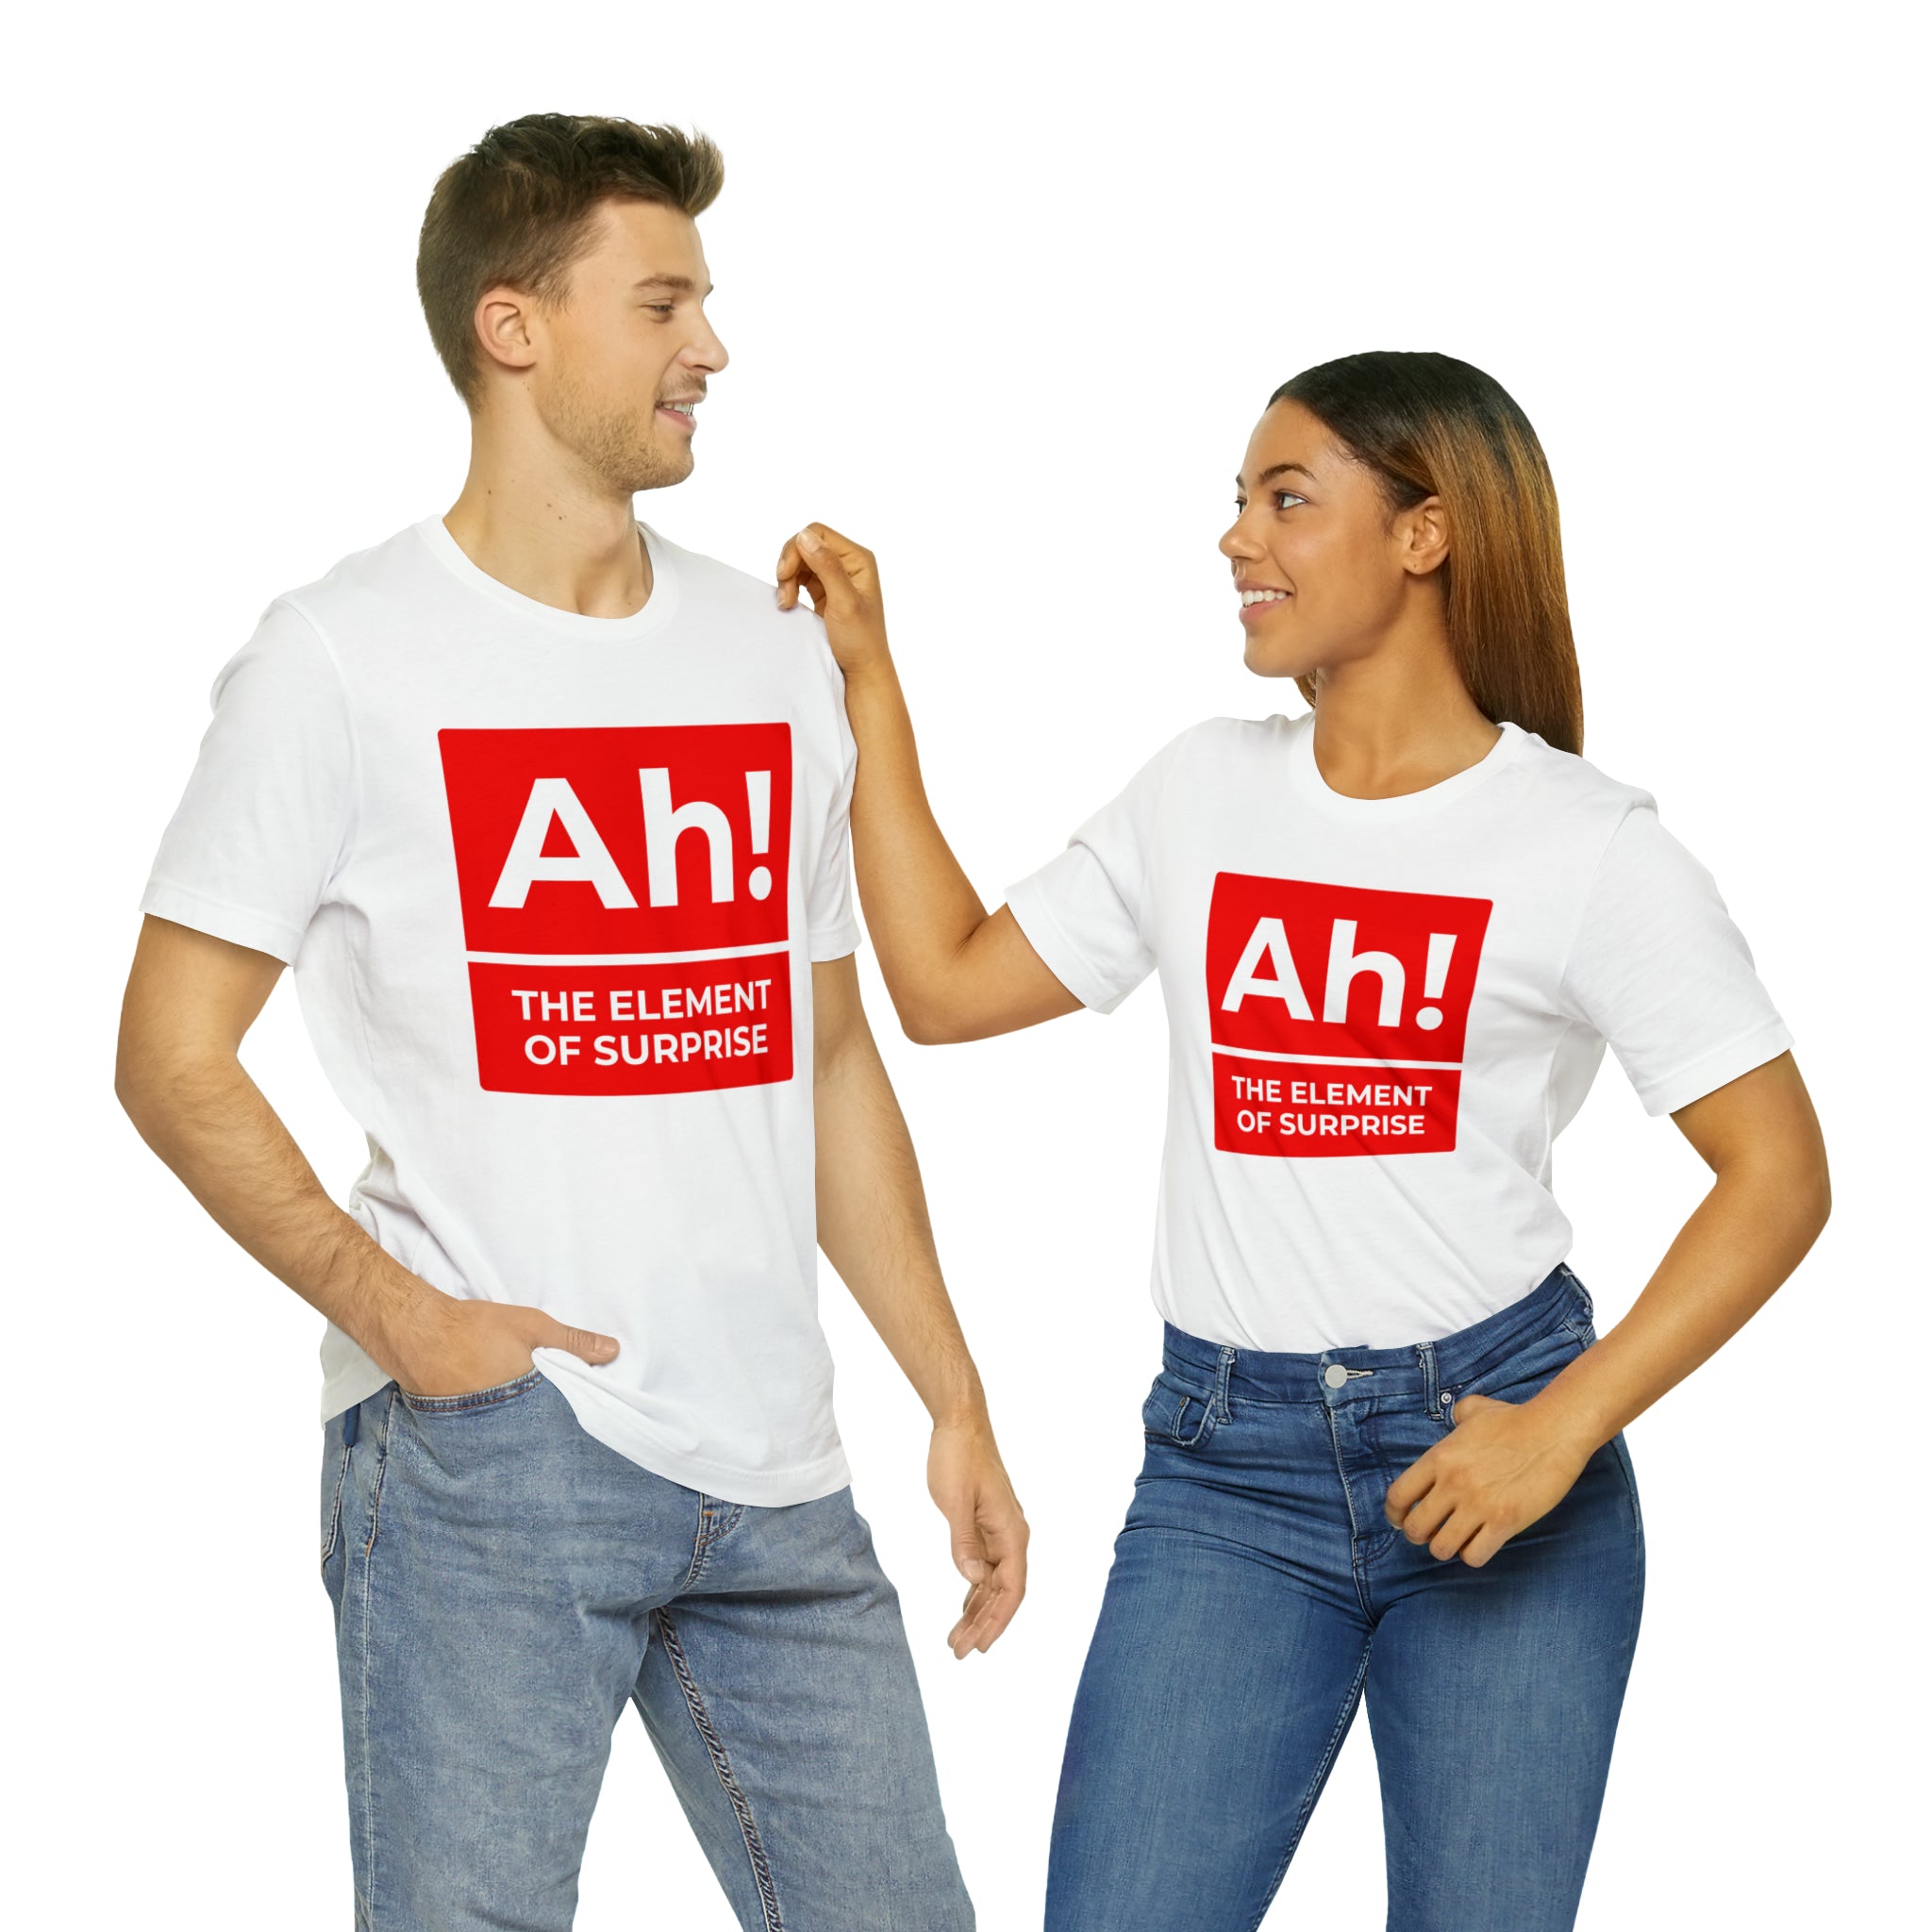 A man and woman standing next to each other wearing an Ah! the Element of Surprise T-shirt, symbolizing their shared interest in science.